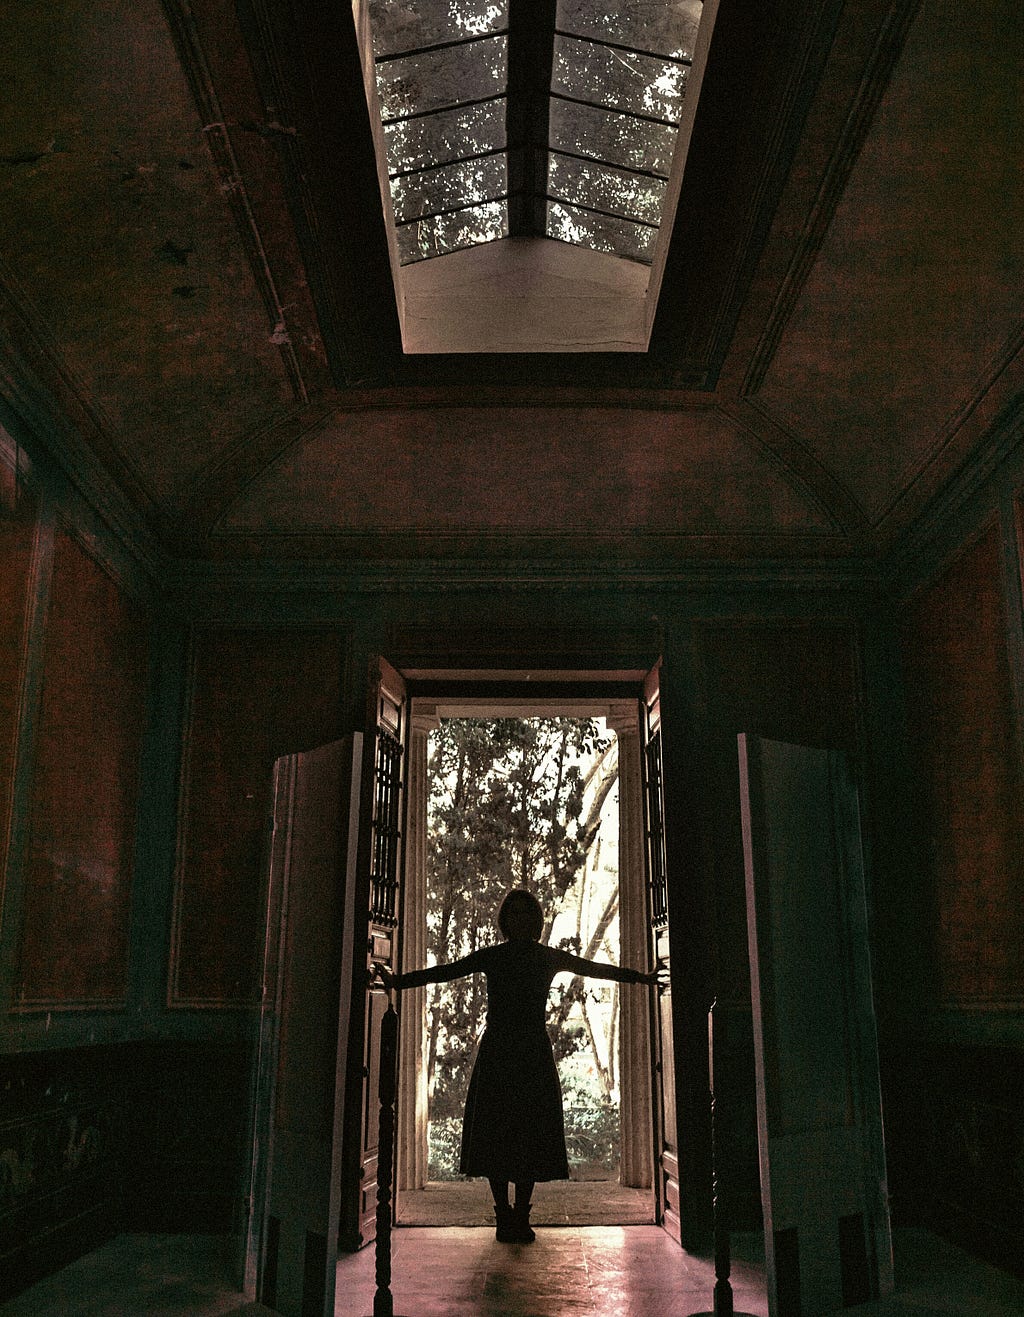 Picture of a lady standing at a door that seems dark on the inside but the outside is bright. Used to depict an imperfection that leads to new horizons.